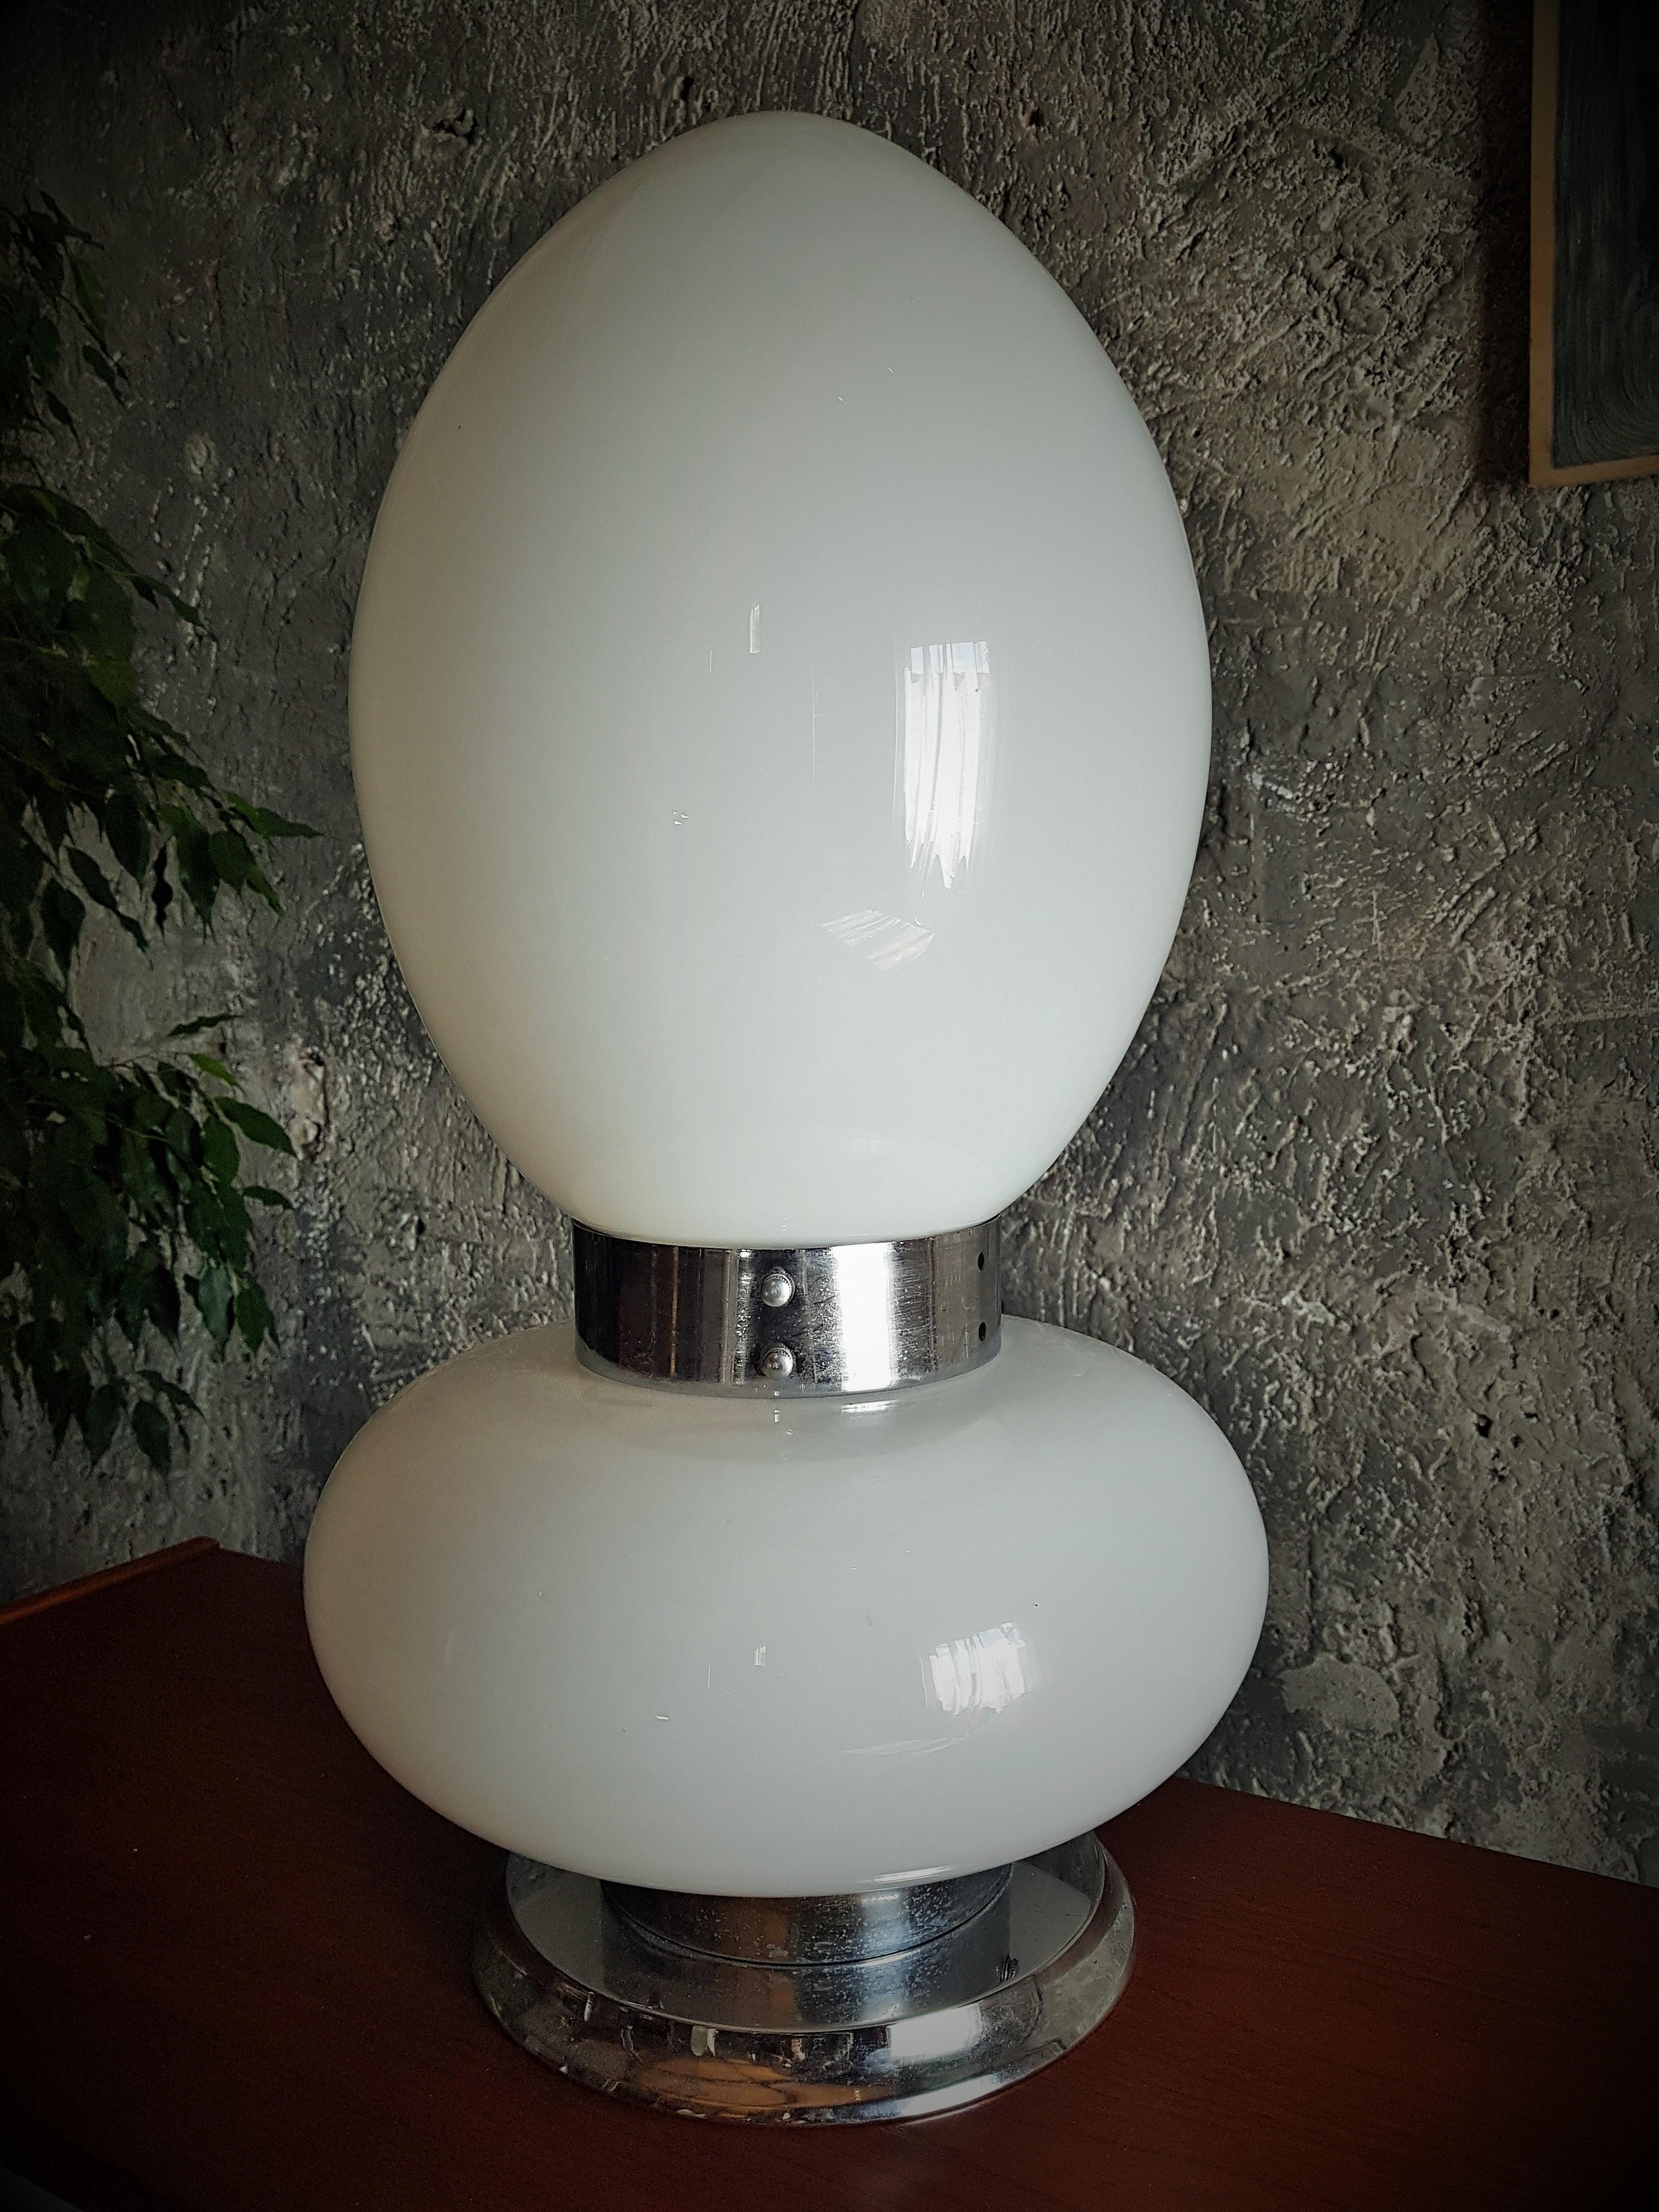 Mid-century table floor lamp lip stick by Mazzega, Italy 1968.

on the pictures yellow bulb used in lower section. the glass is white in both parts.